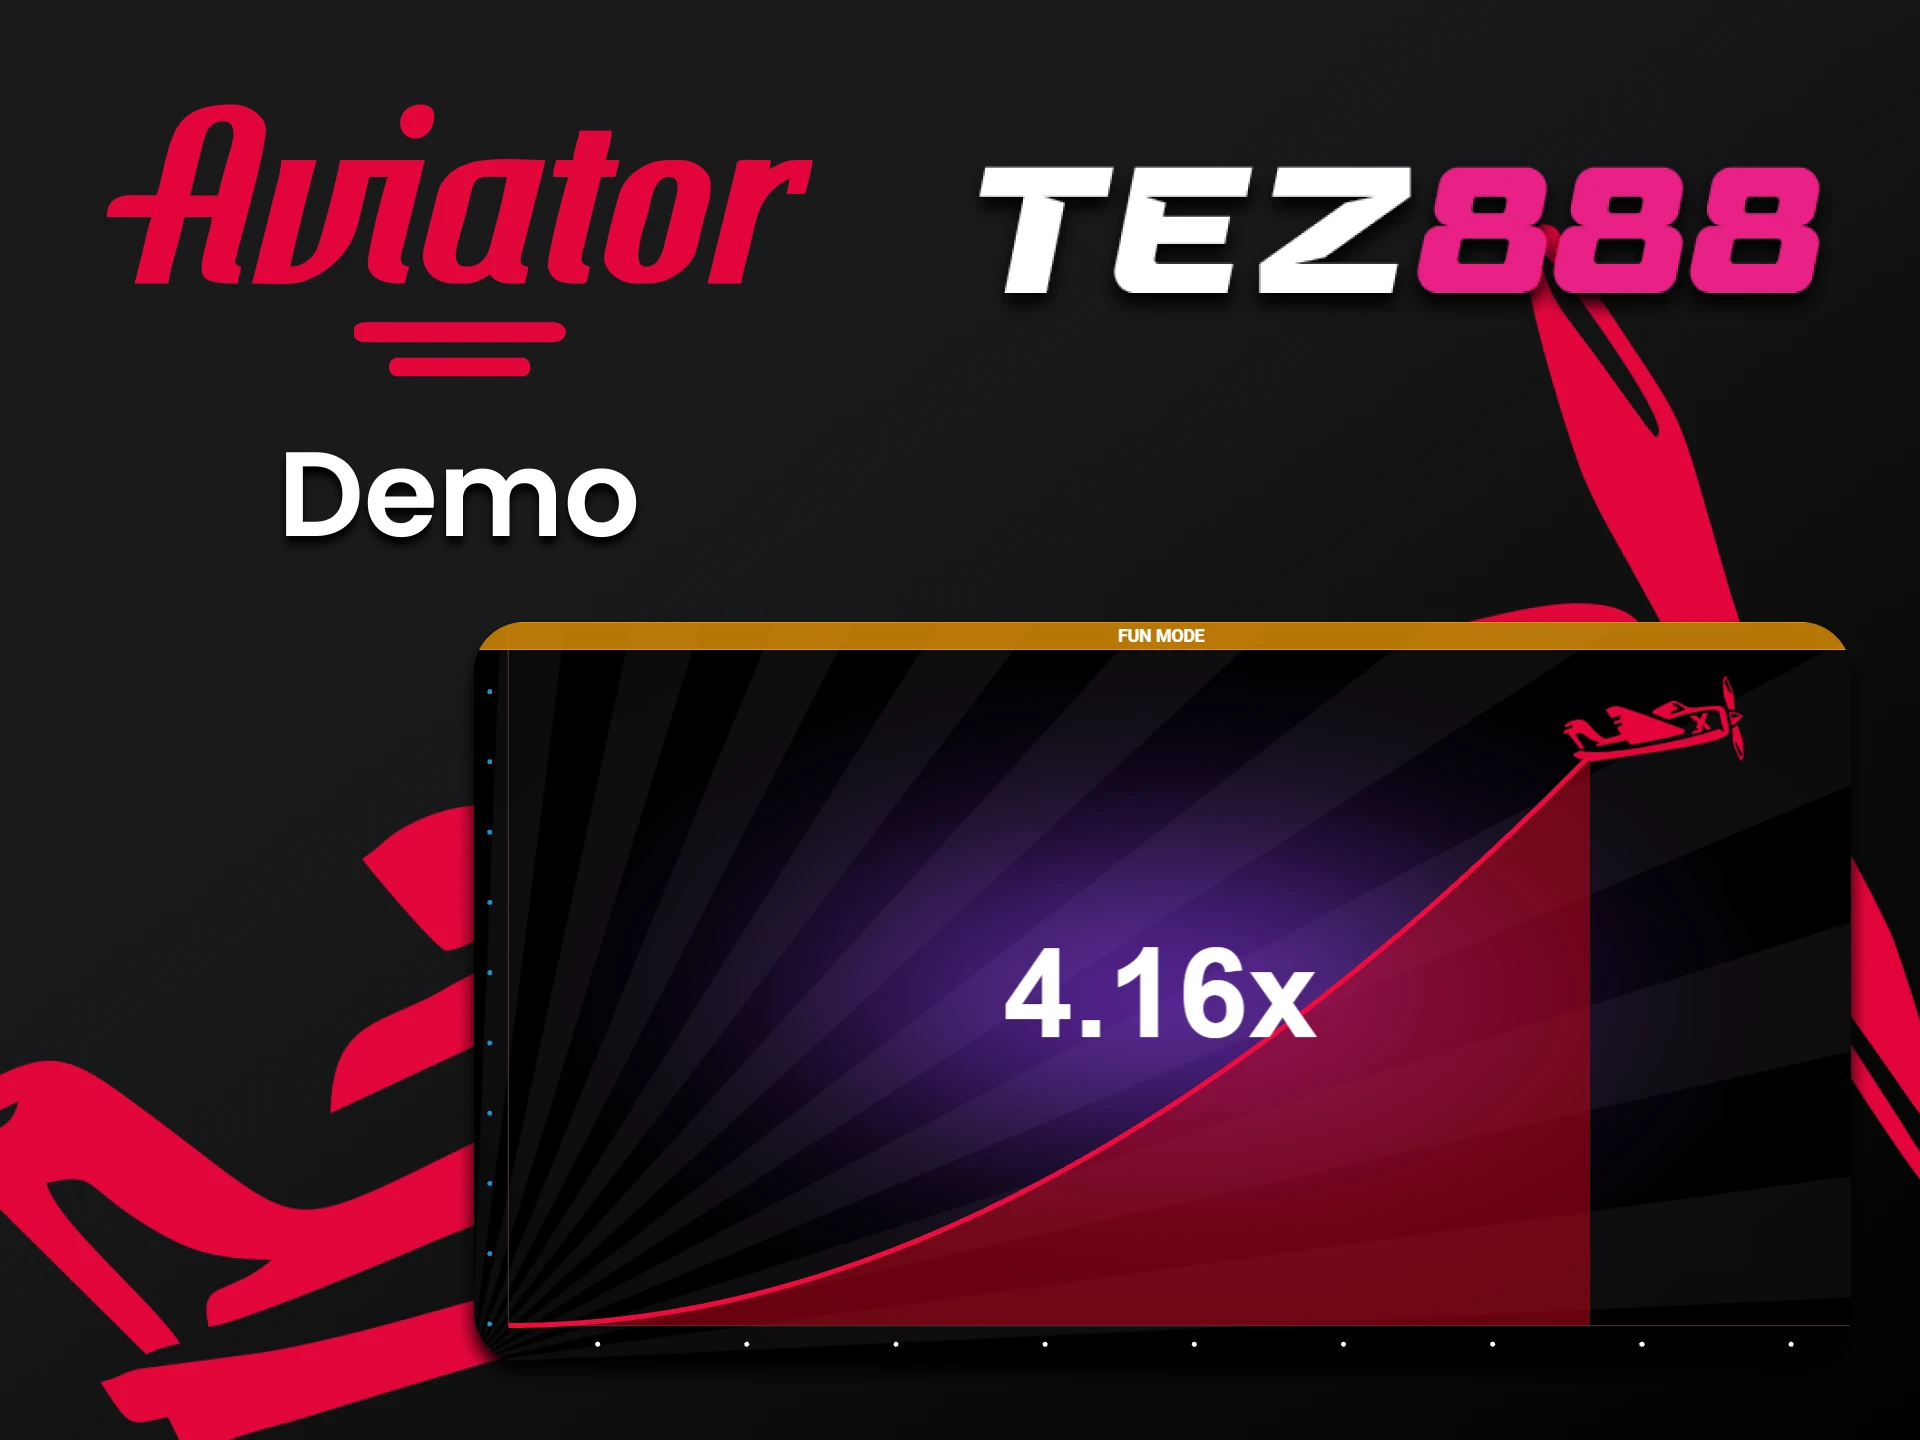 For training, there is a demo version of Aviator on the Tez888 website.